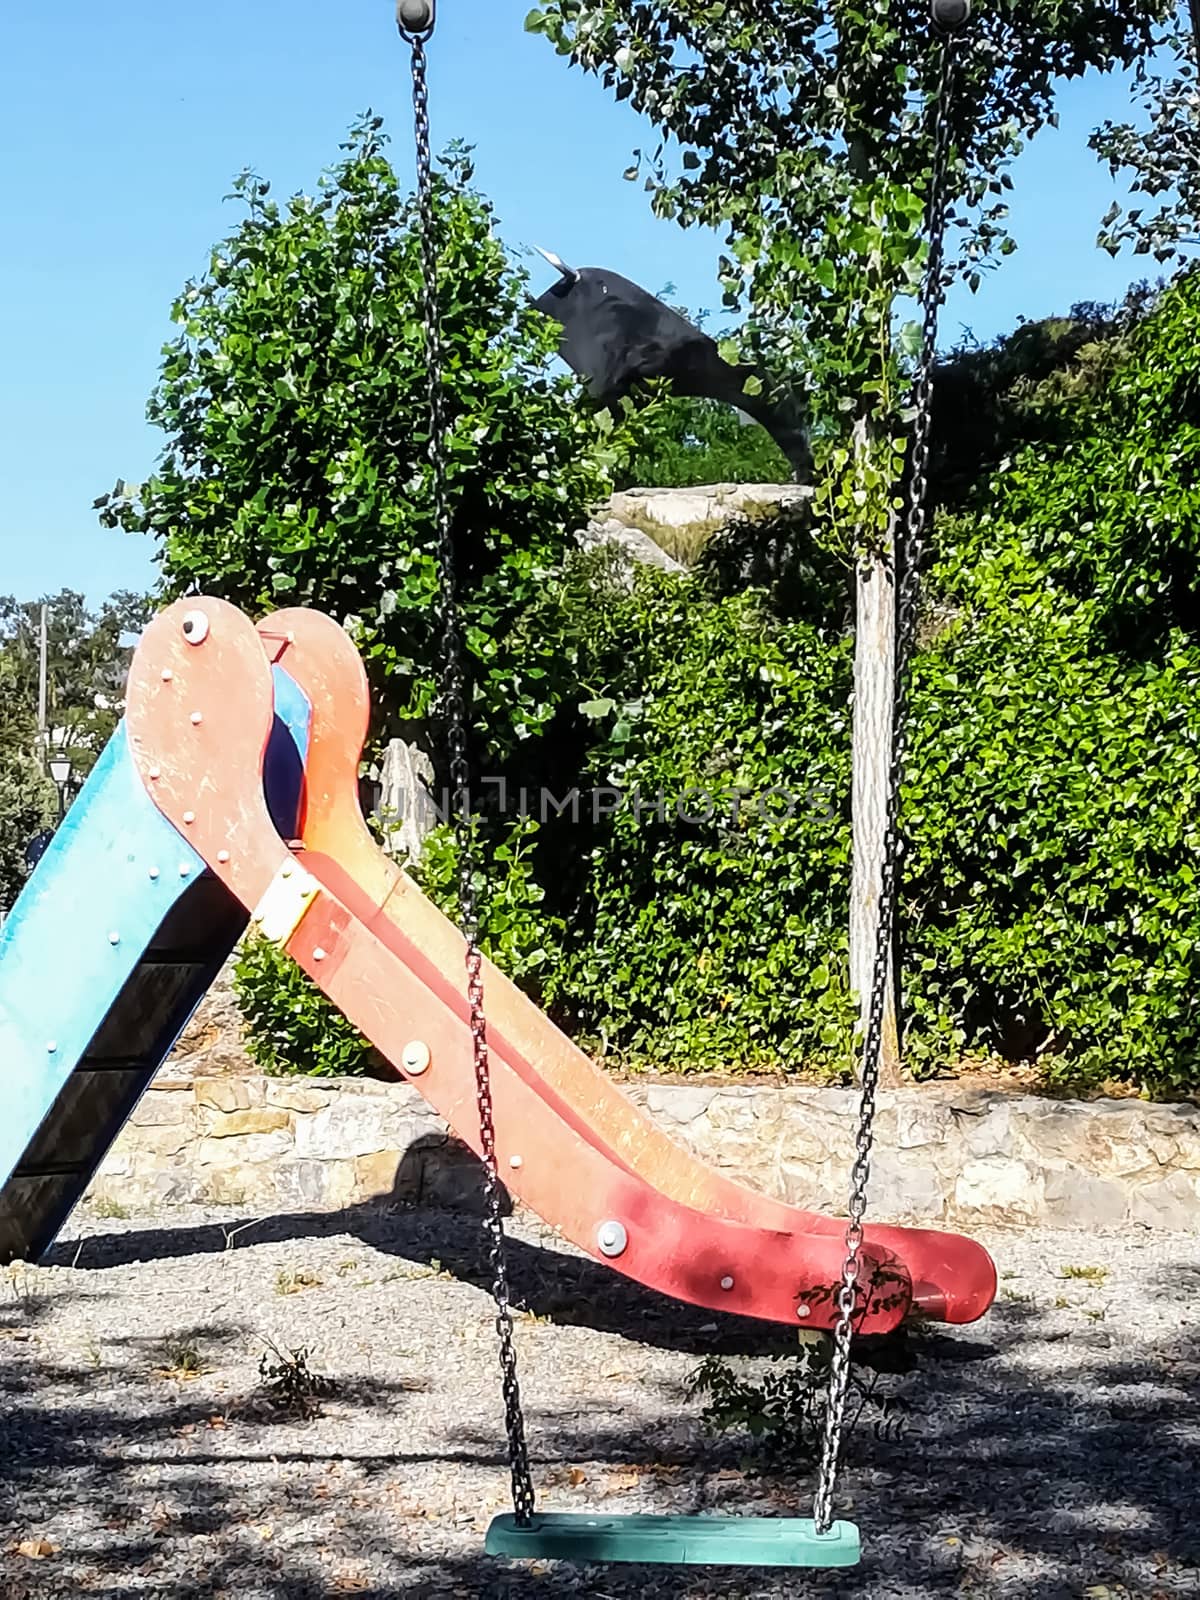 children playground with very colorful swings and some trees